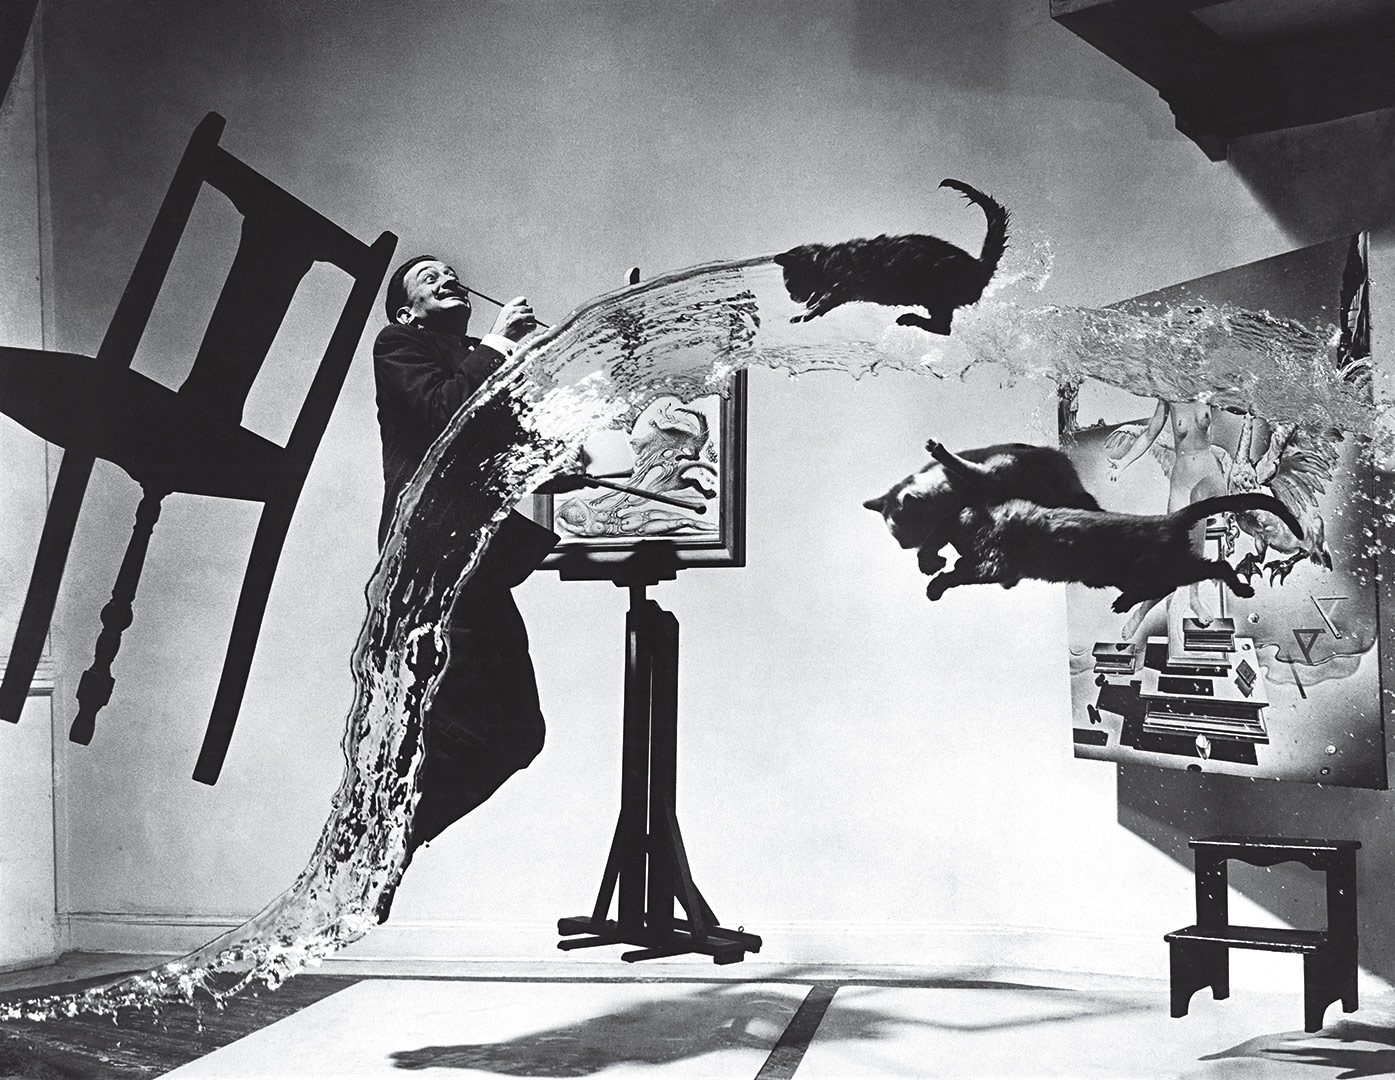 Dalí Atomicus | 100 Photographs | The Most Influential Images of All Time